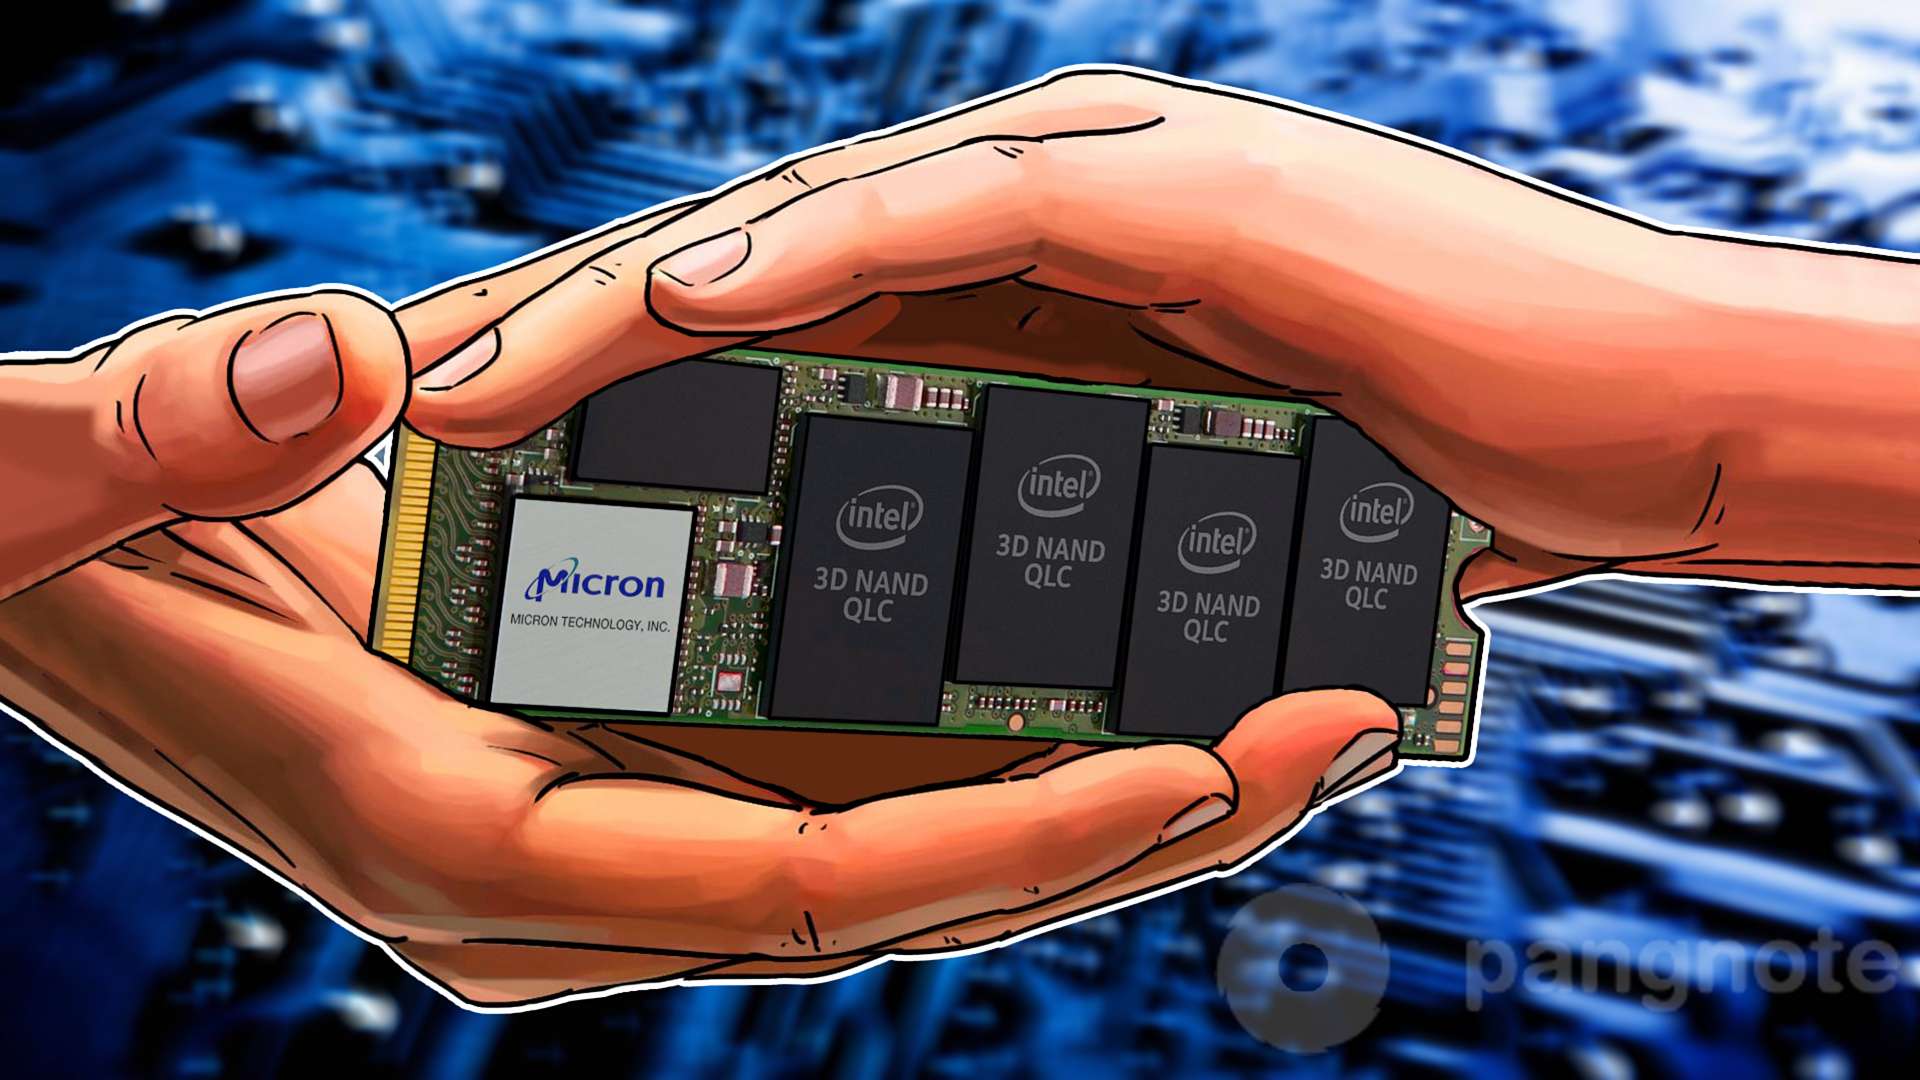 SSD based on 64-layer 3D NAND developed by Intel and Micron